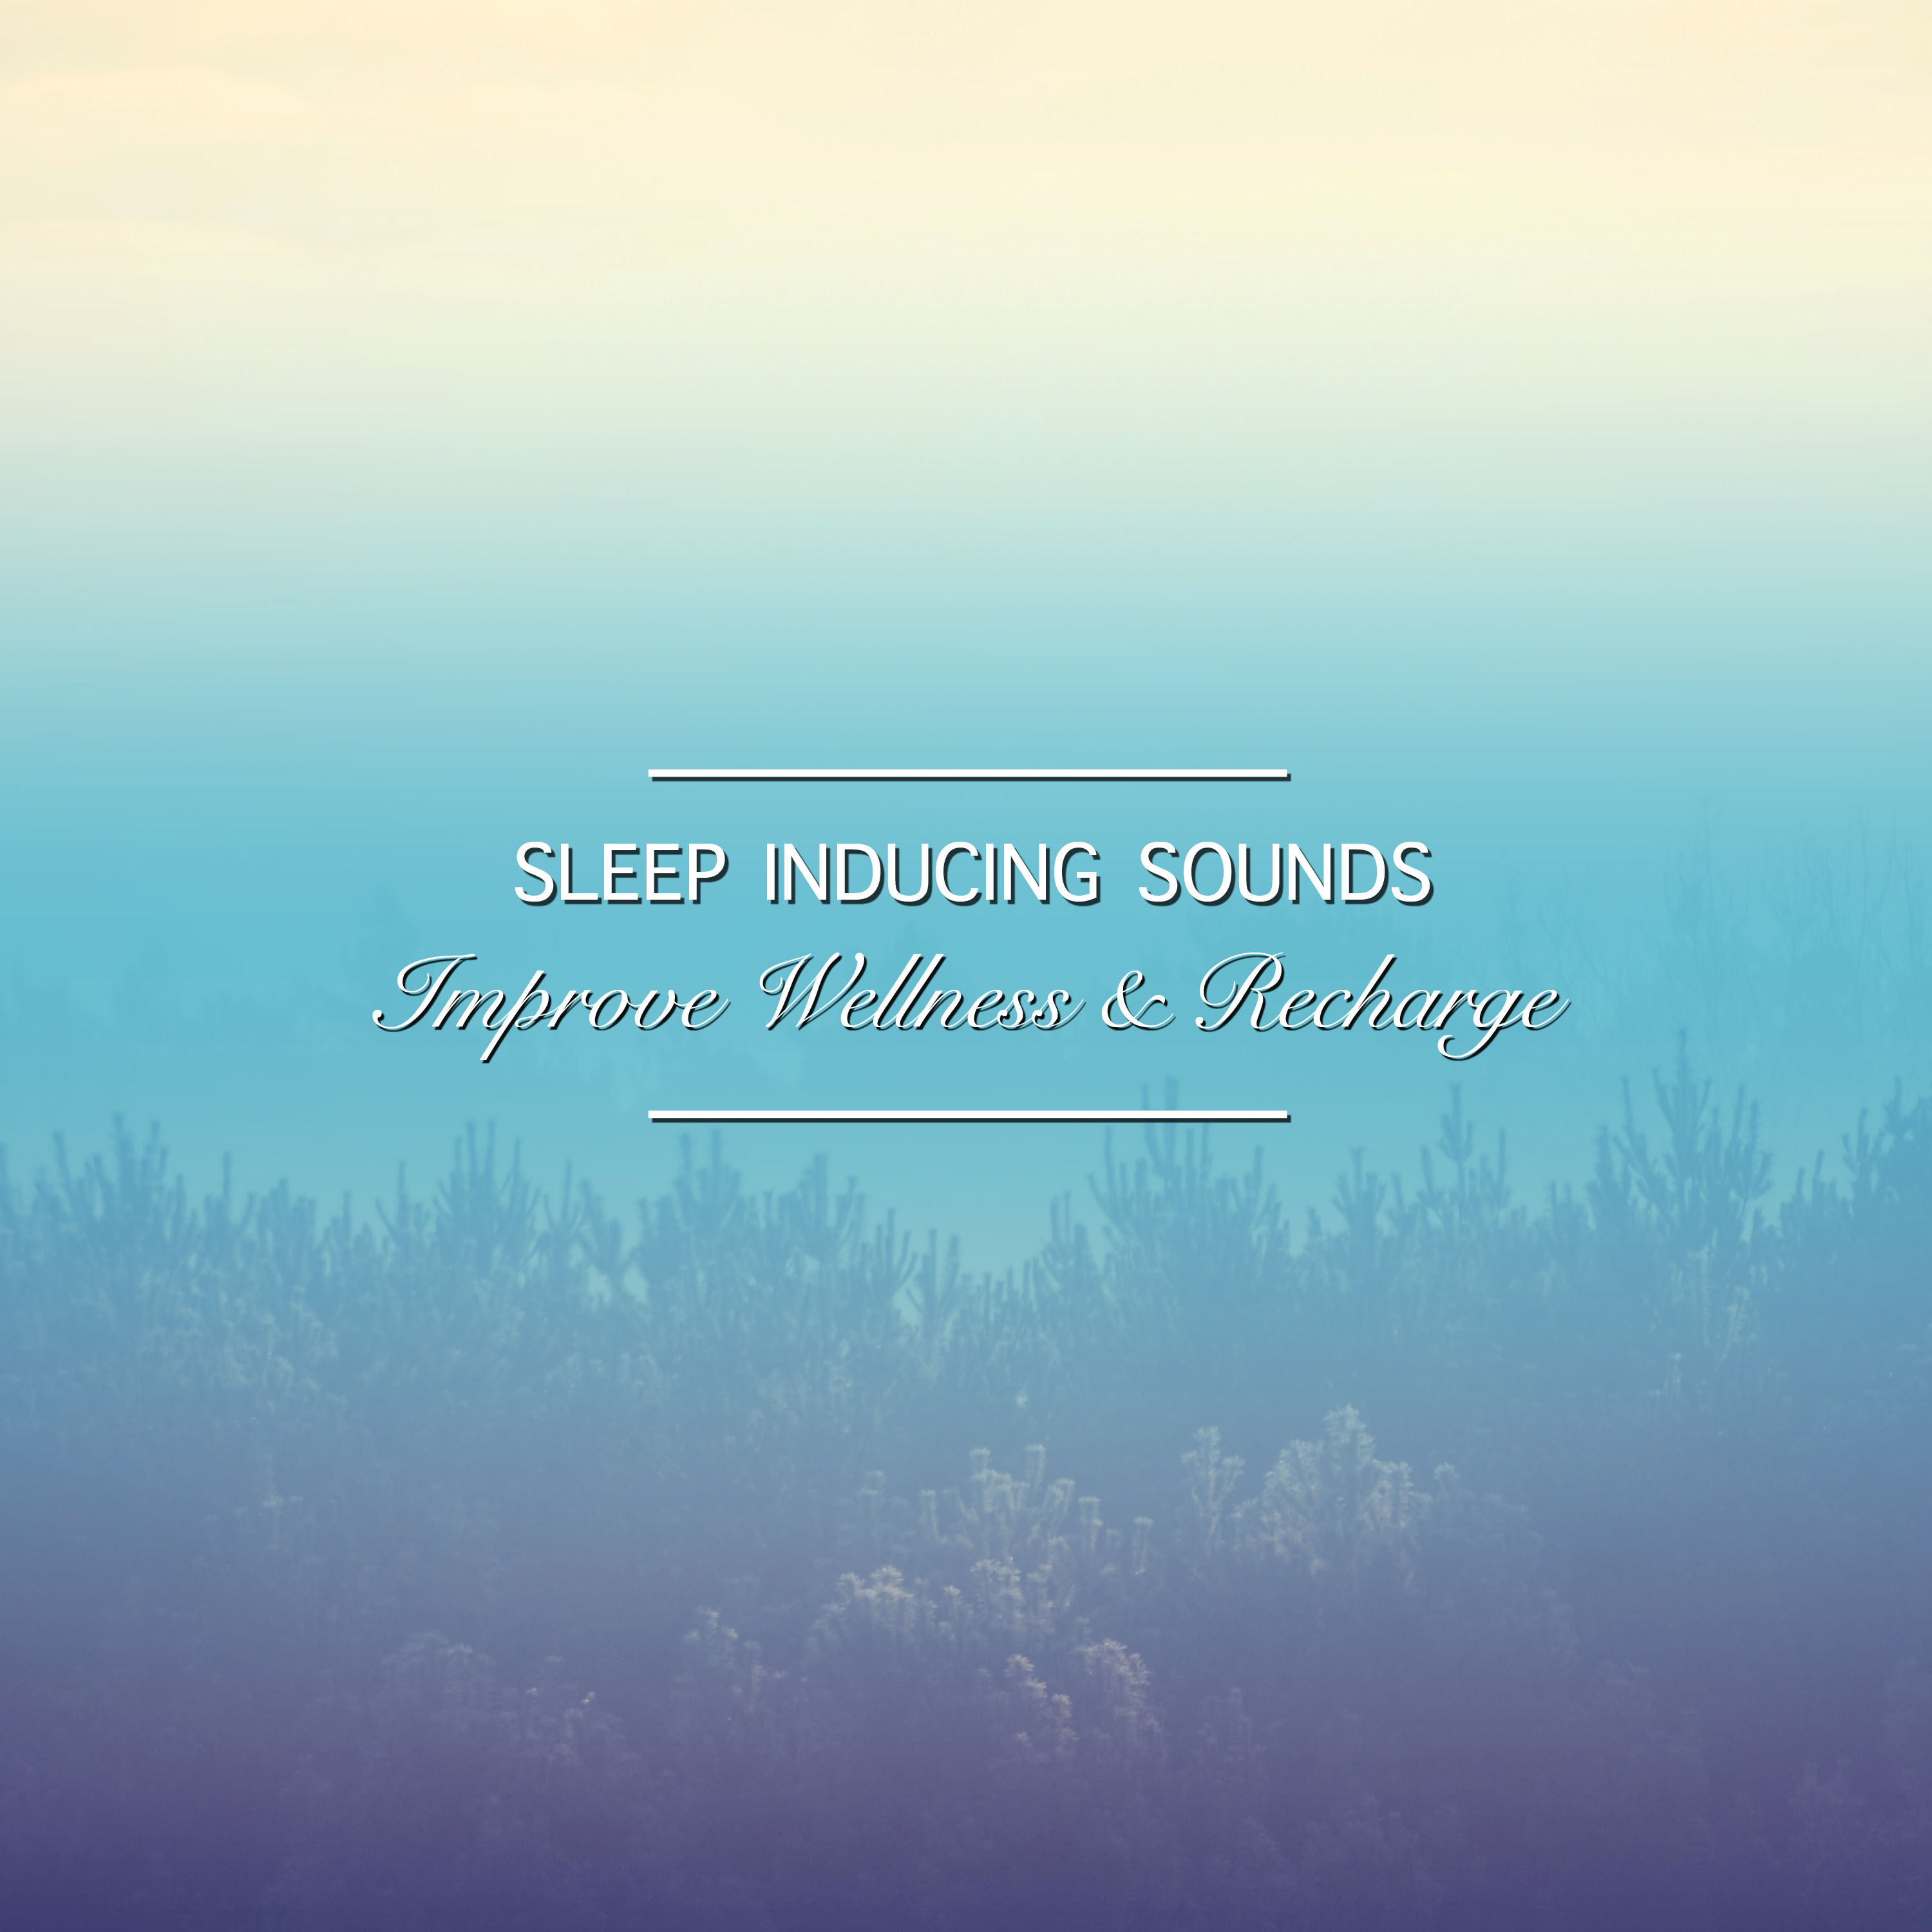 20 Sleep Inducing Sounds to Improve Wellness and Recharge Chakras